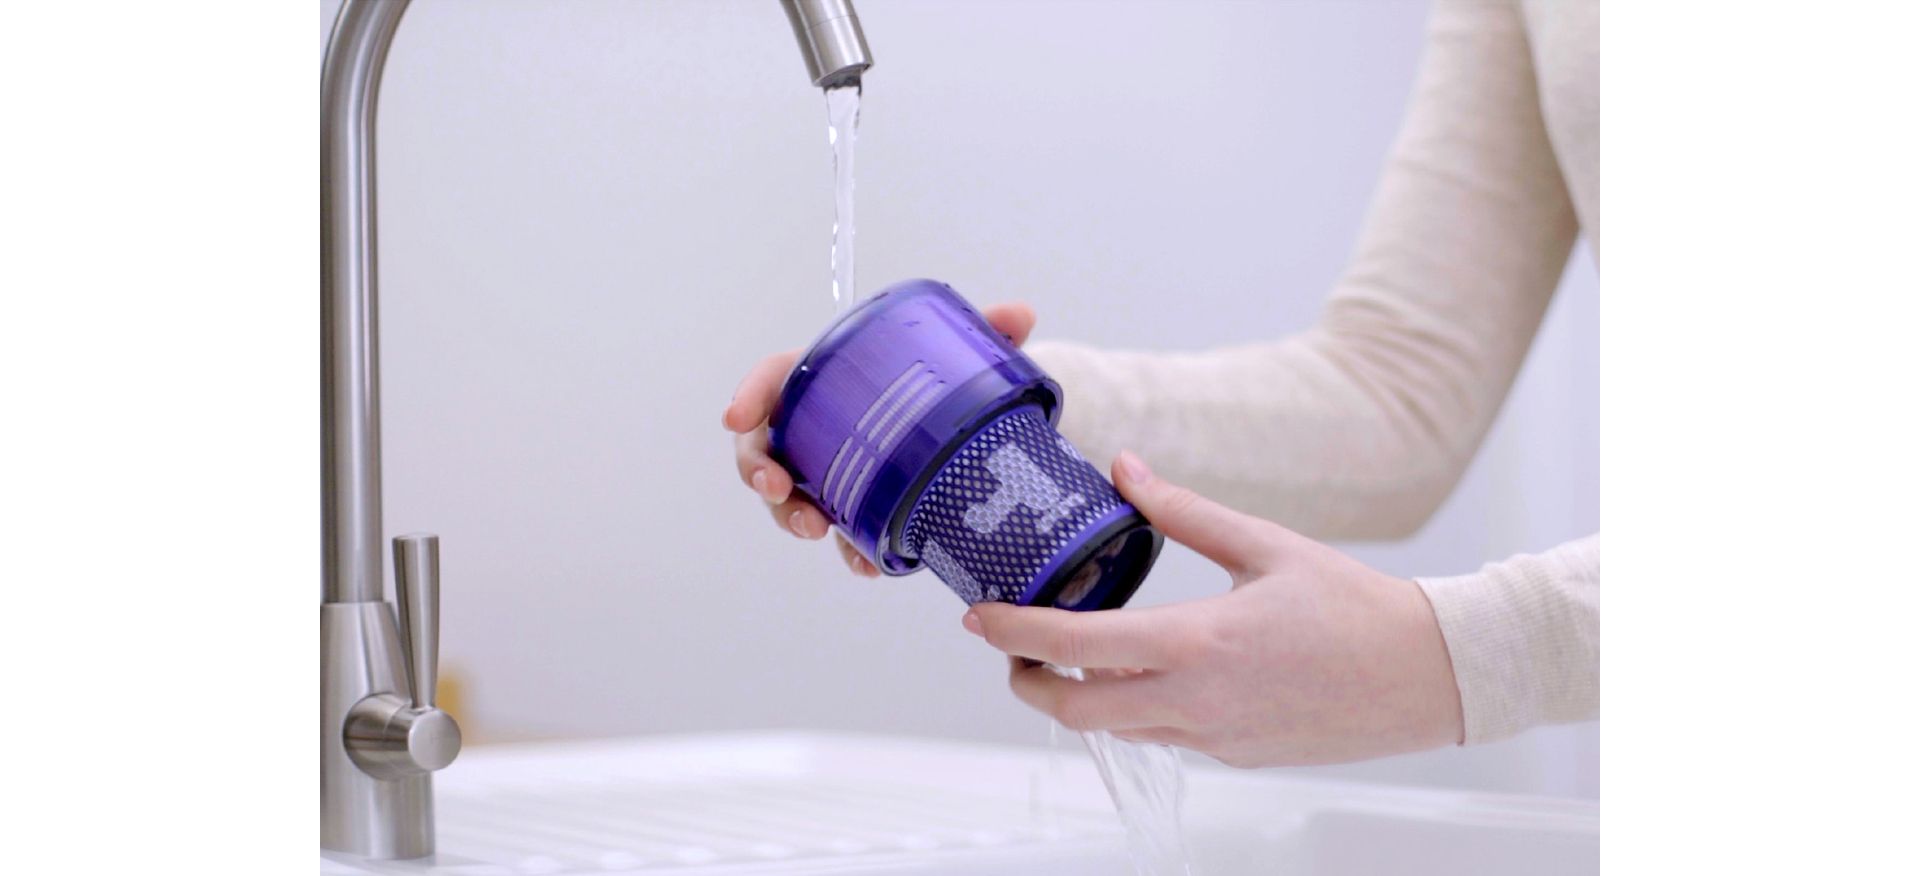 https://dyson-h.assetsadobe2.com/is/image/content/dam/dyson/leap-petite-global/products/floorcare/sticks/v12-detected-slim/owners/how-to-clean-your-filter/how-to-clean-your-filter-03.jpg?$responsive$&cropPathE=desktop&fit=stretch,1&wid=1920